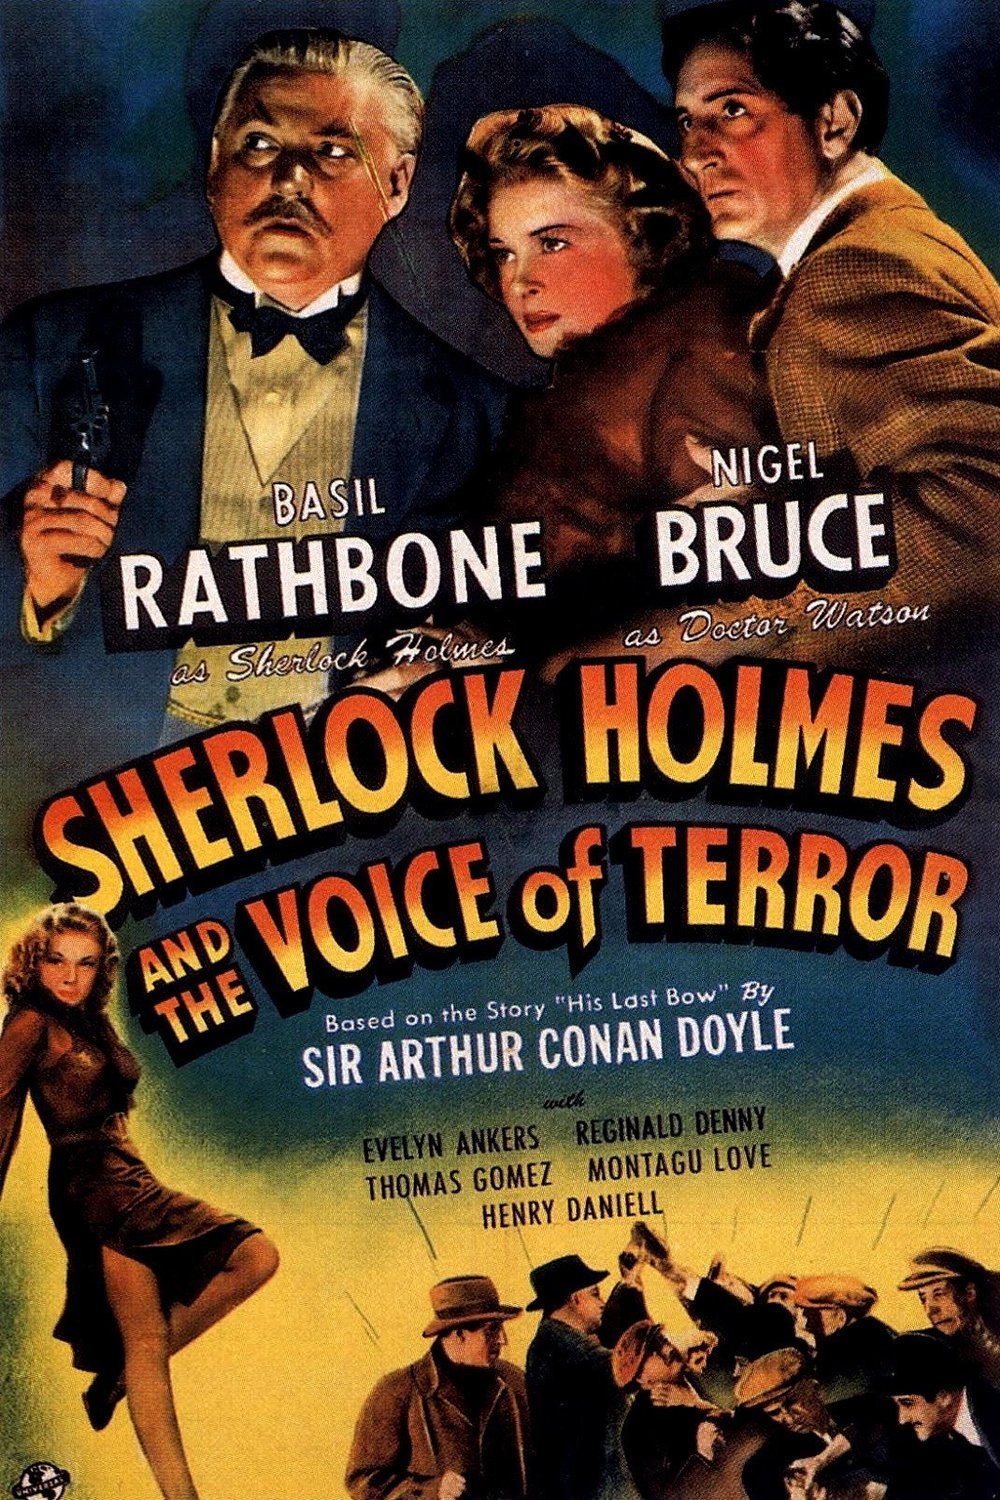 Poster of the movie Sherlock Holmes and the Voice of Terror